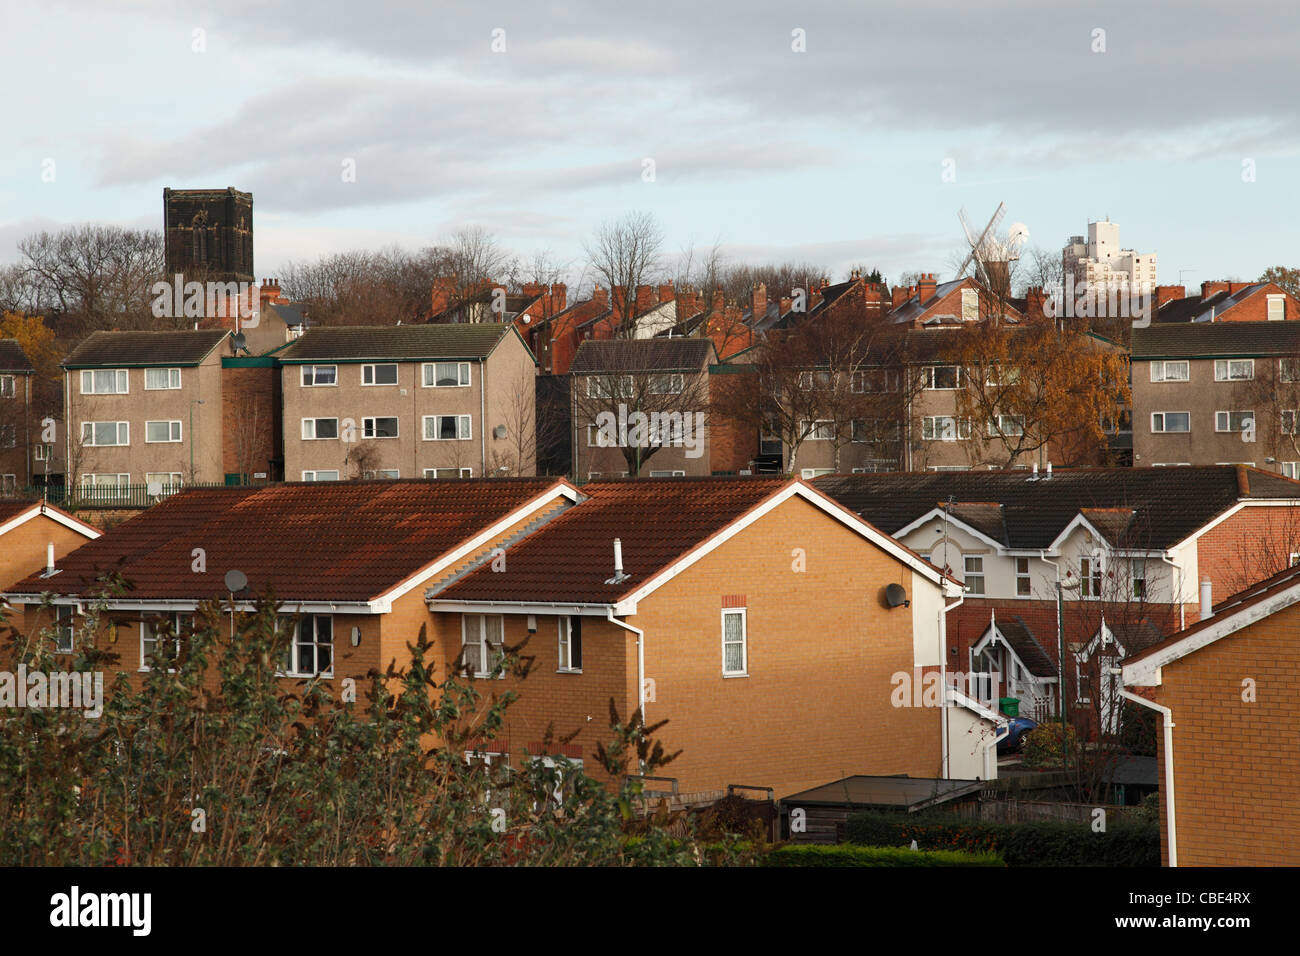 Social and private housing in Sneinton, Nottingham, England, U.K. Stock Photo